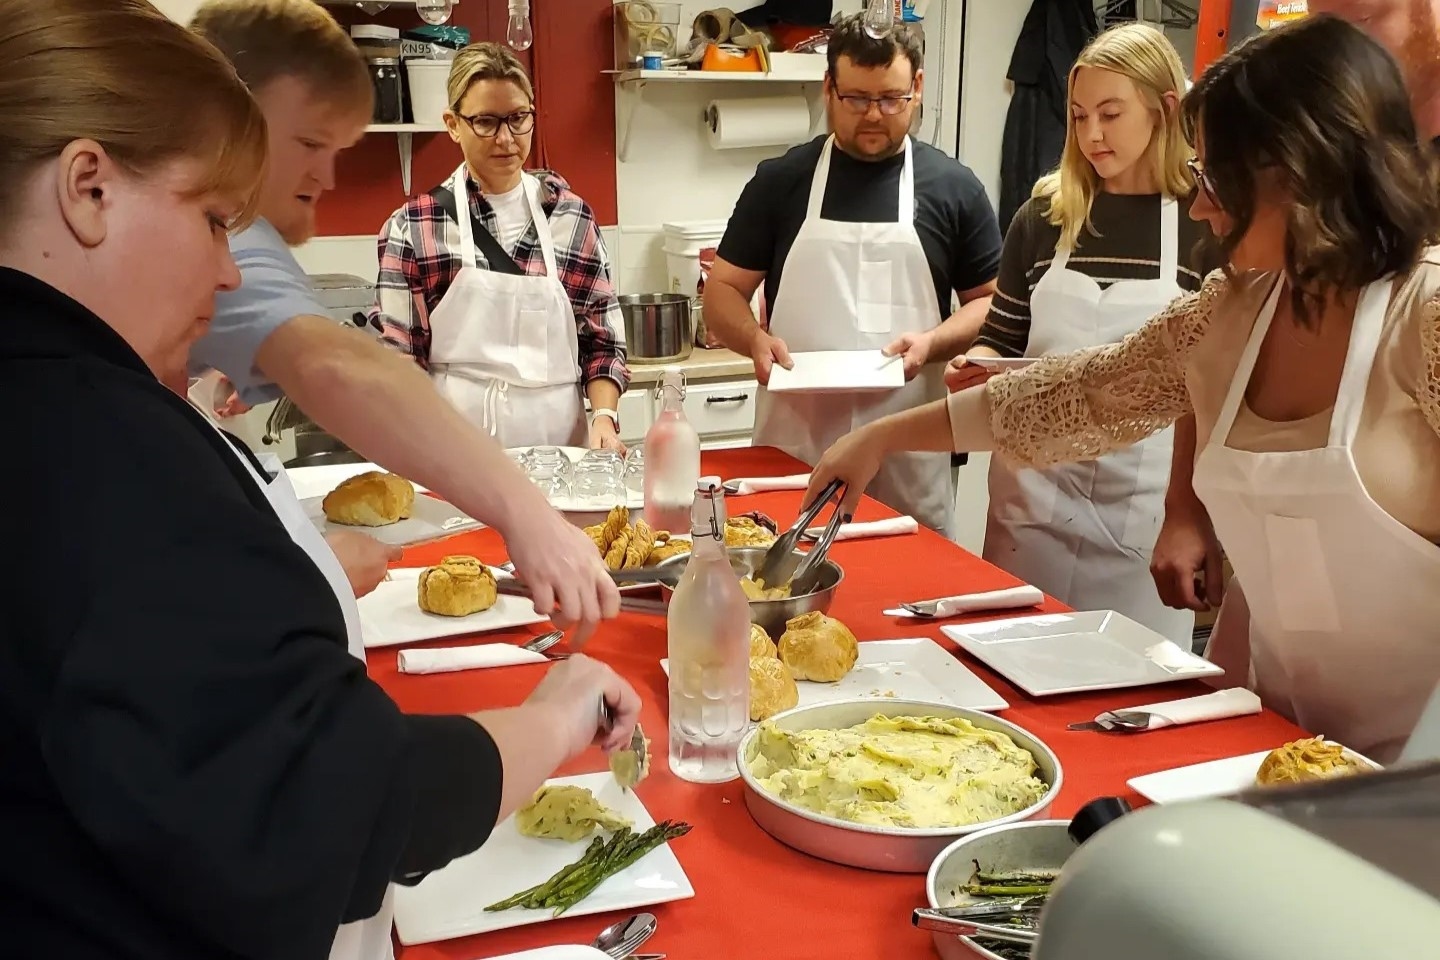 Six people wearing white aprons gather around a red table, taking part in a cooking class